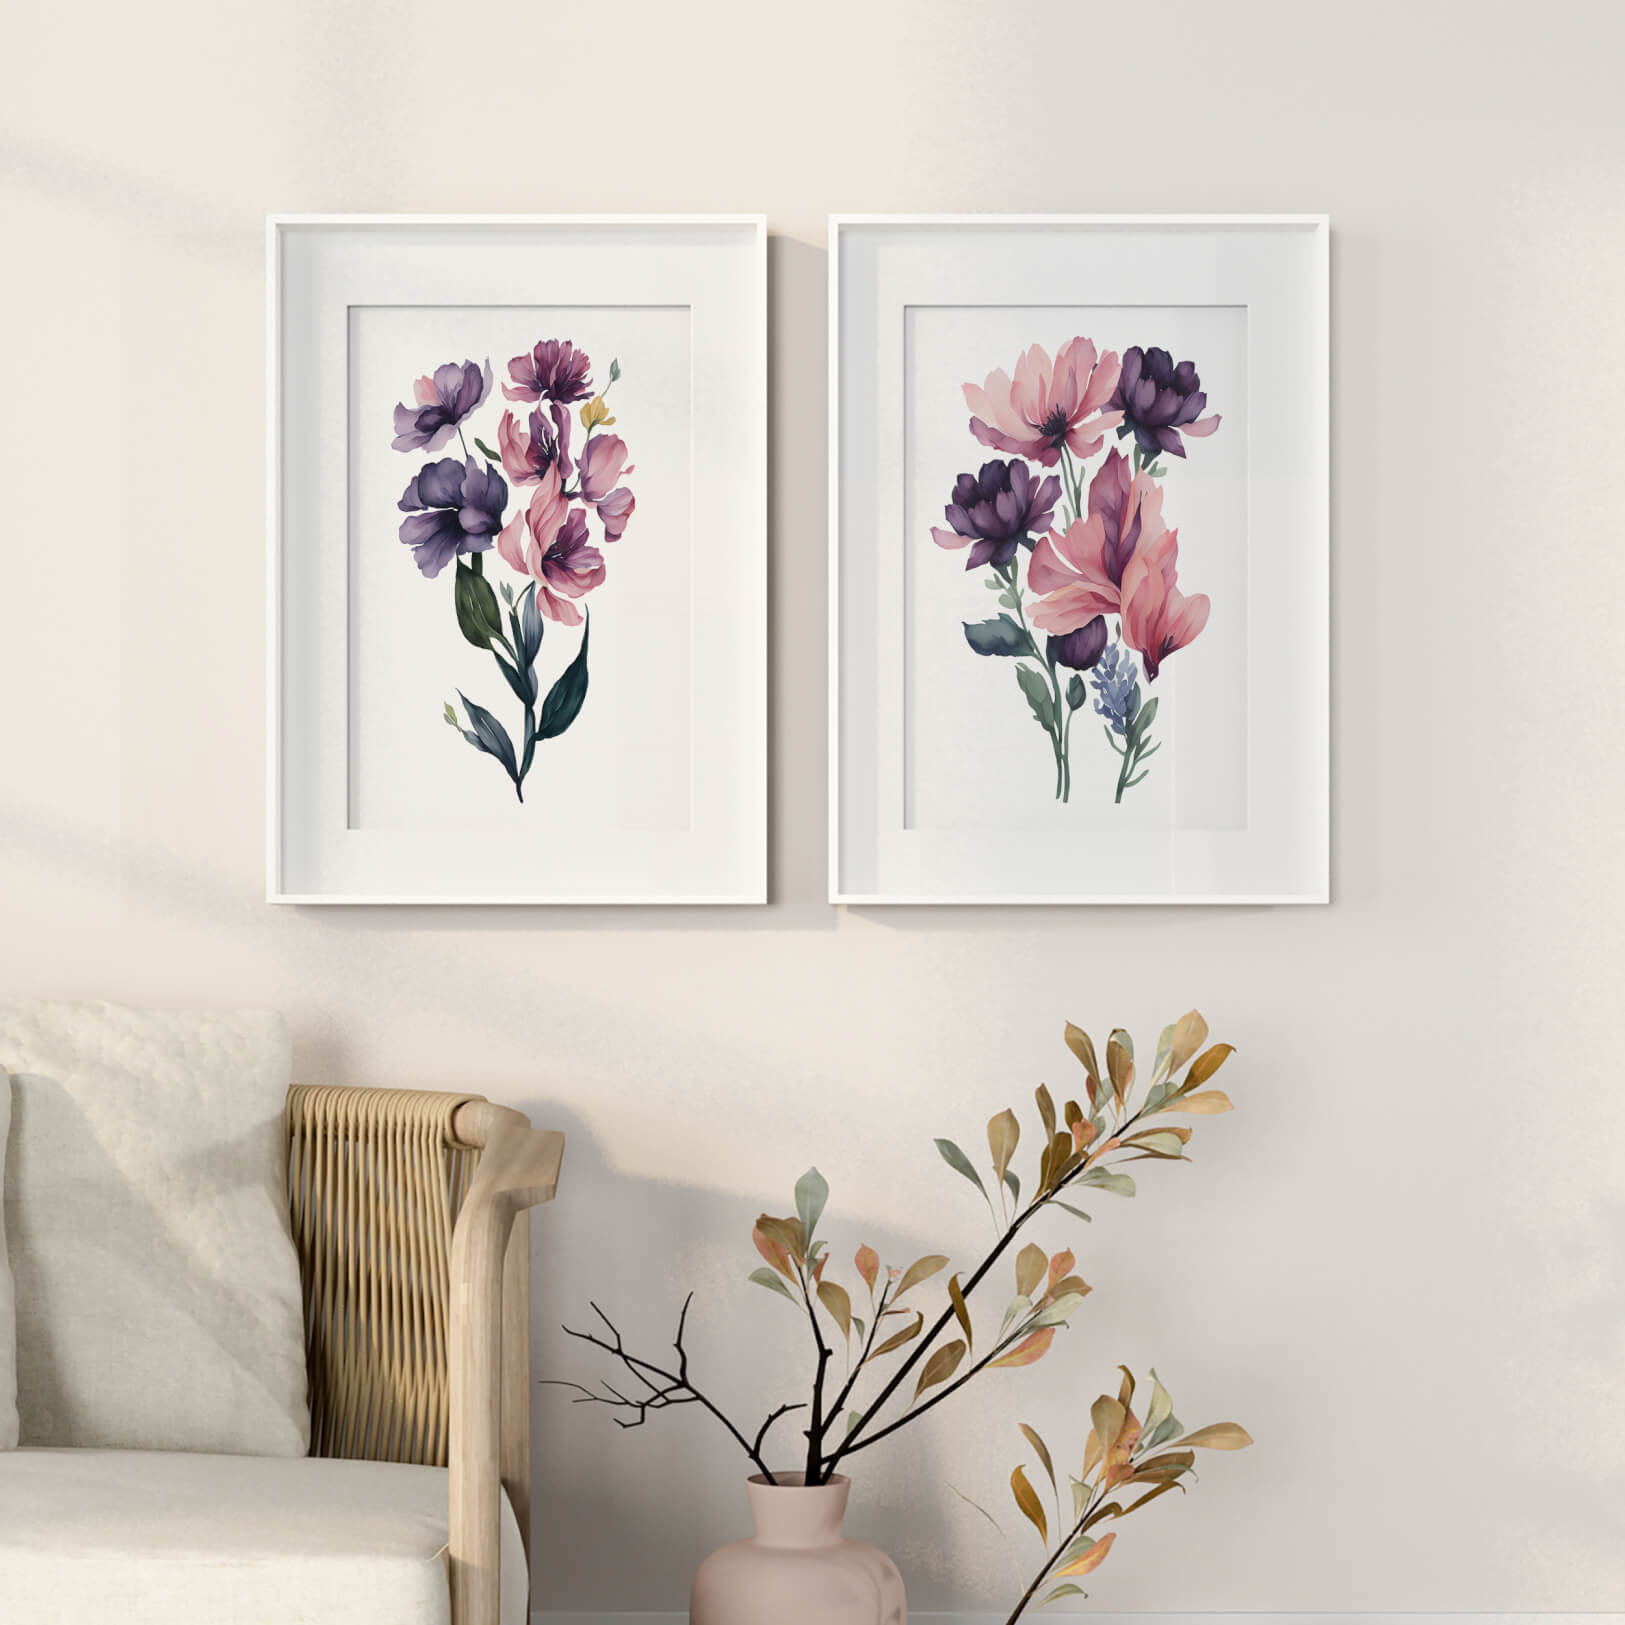 Bloom Into You - Wall Art Print Set Of 2